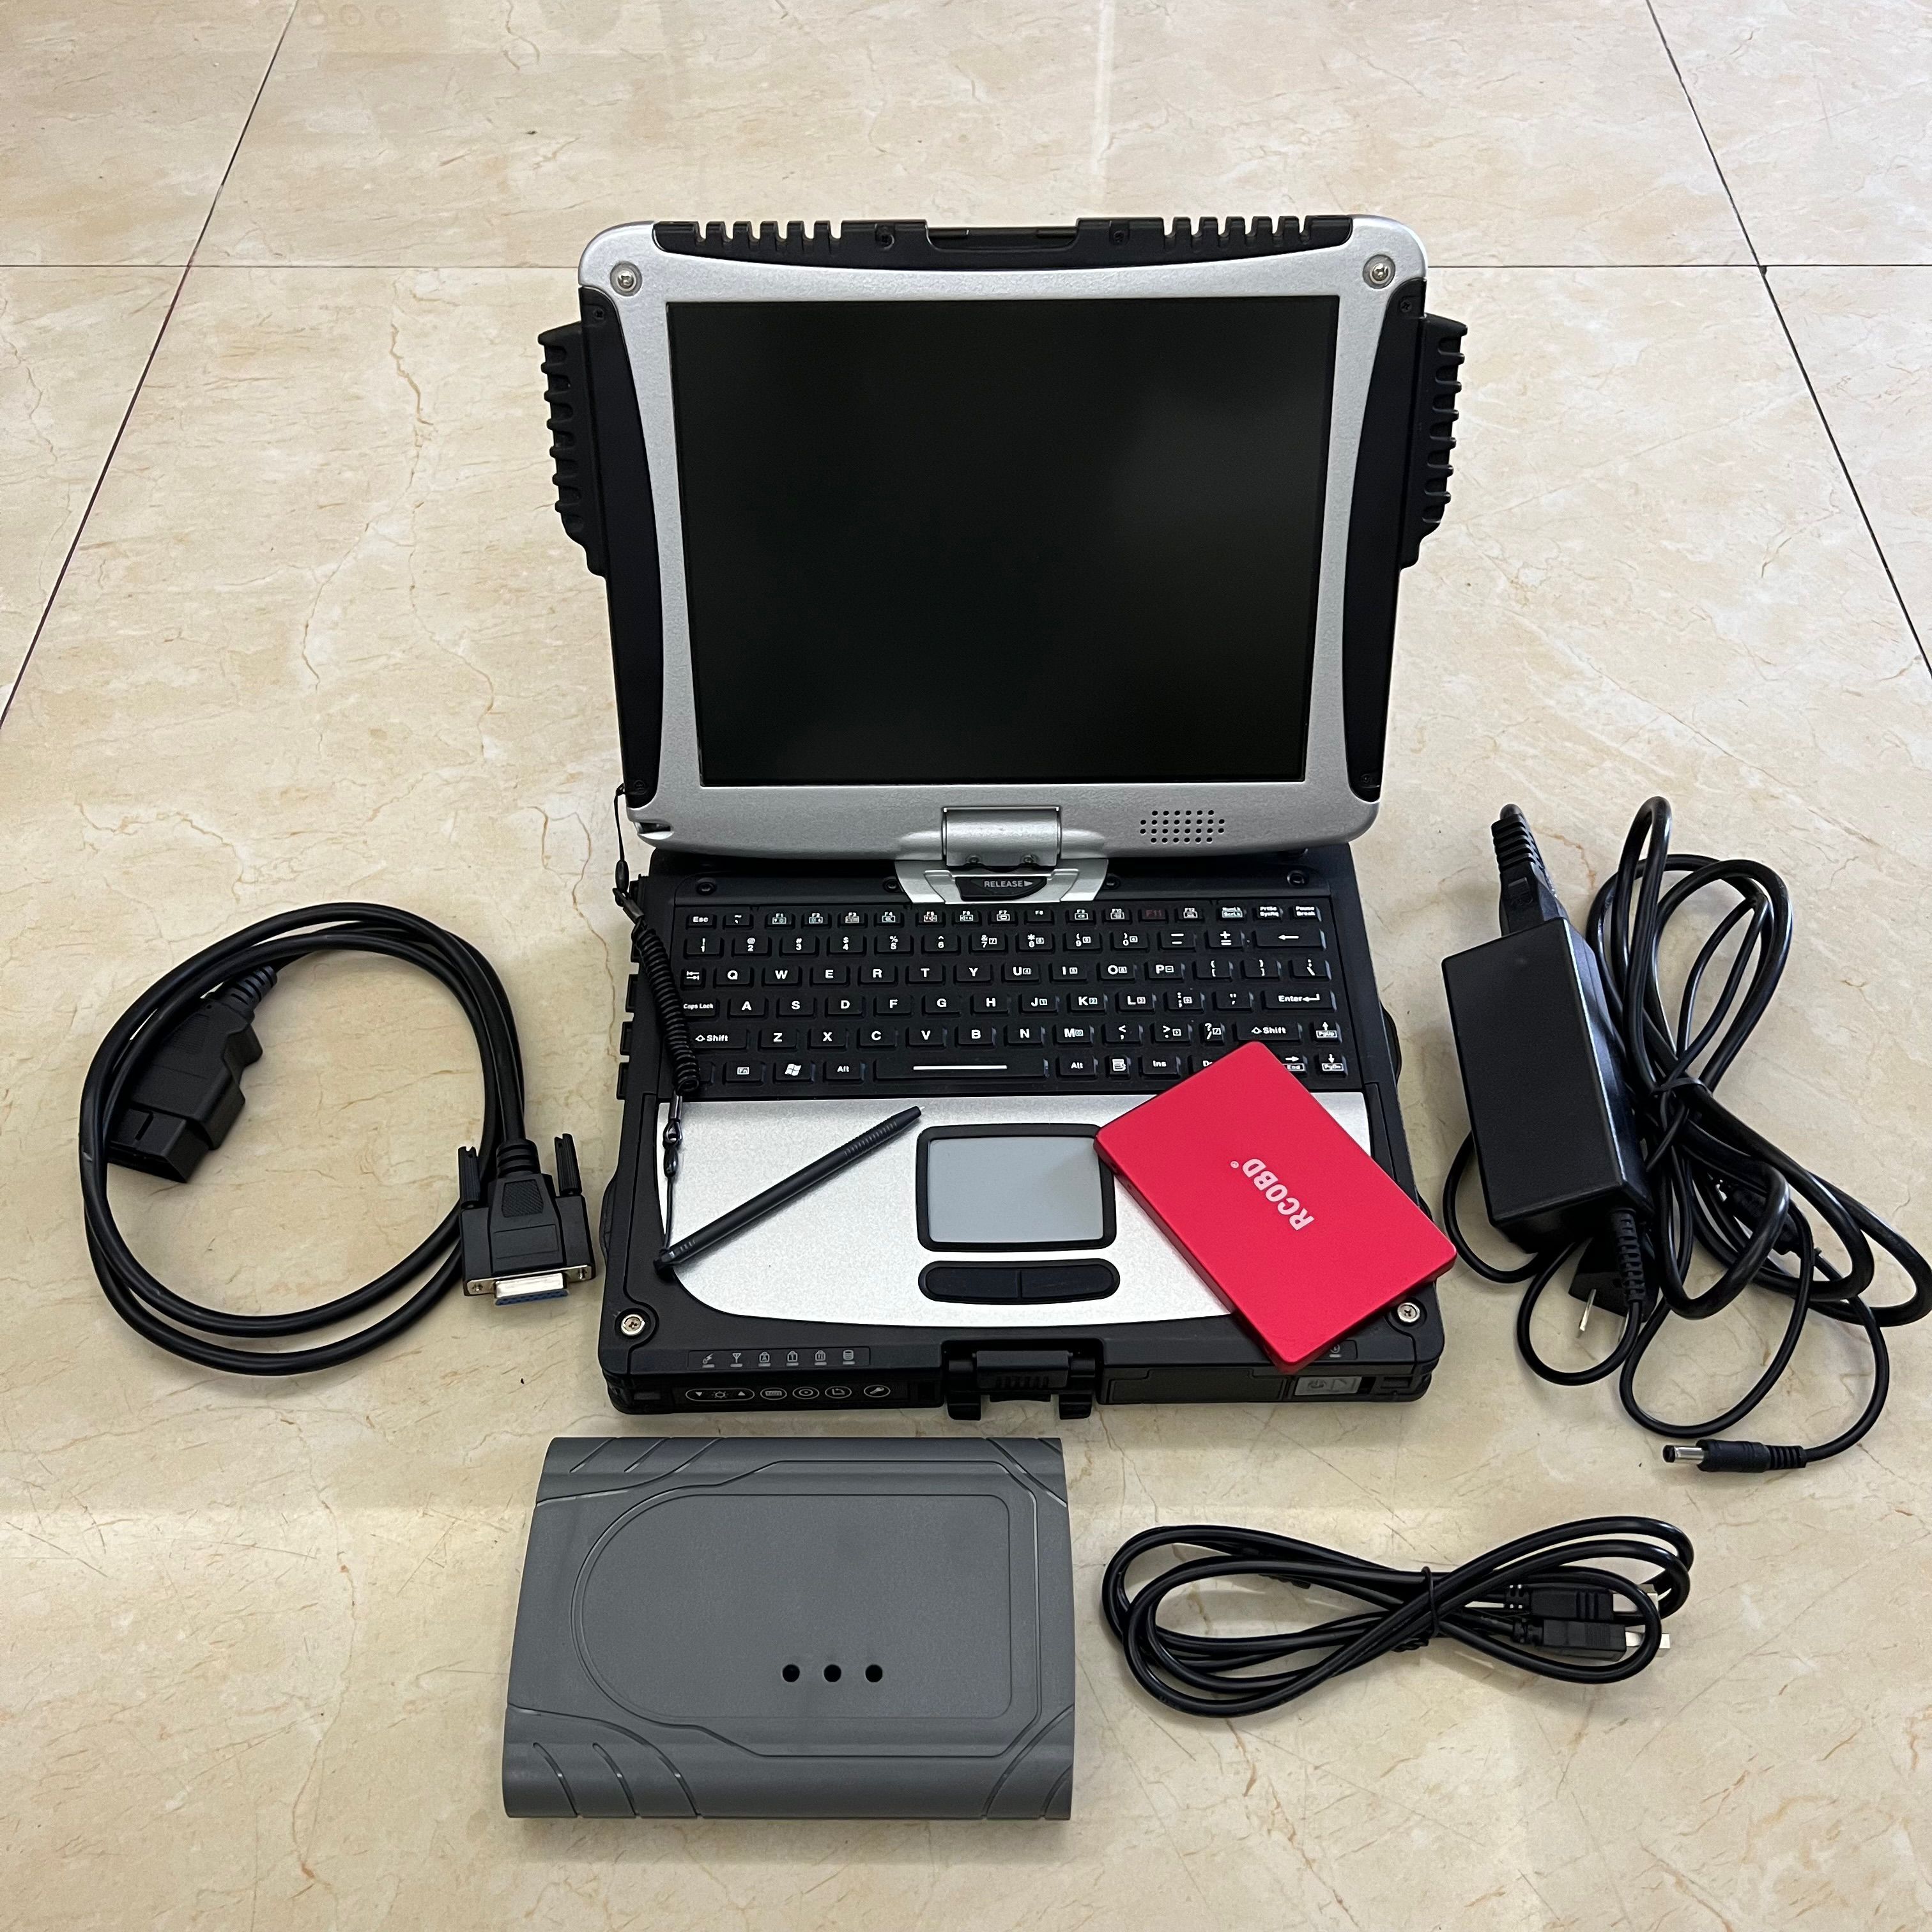 Voor Toyota Diagnostic Device Scanner Tool OTC IT3 TechStream V17 Software Global GTS Laptop CF-19 i5 Computer